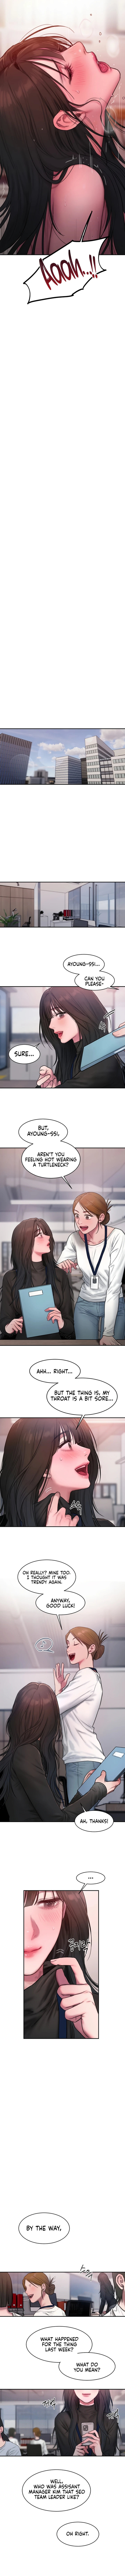 Finding Assistant Manager Kim - Chapter 1 Page 14